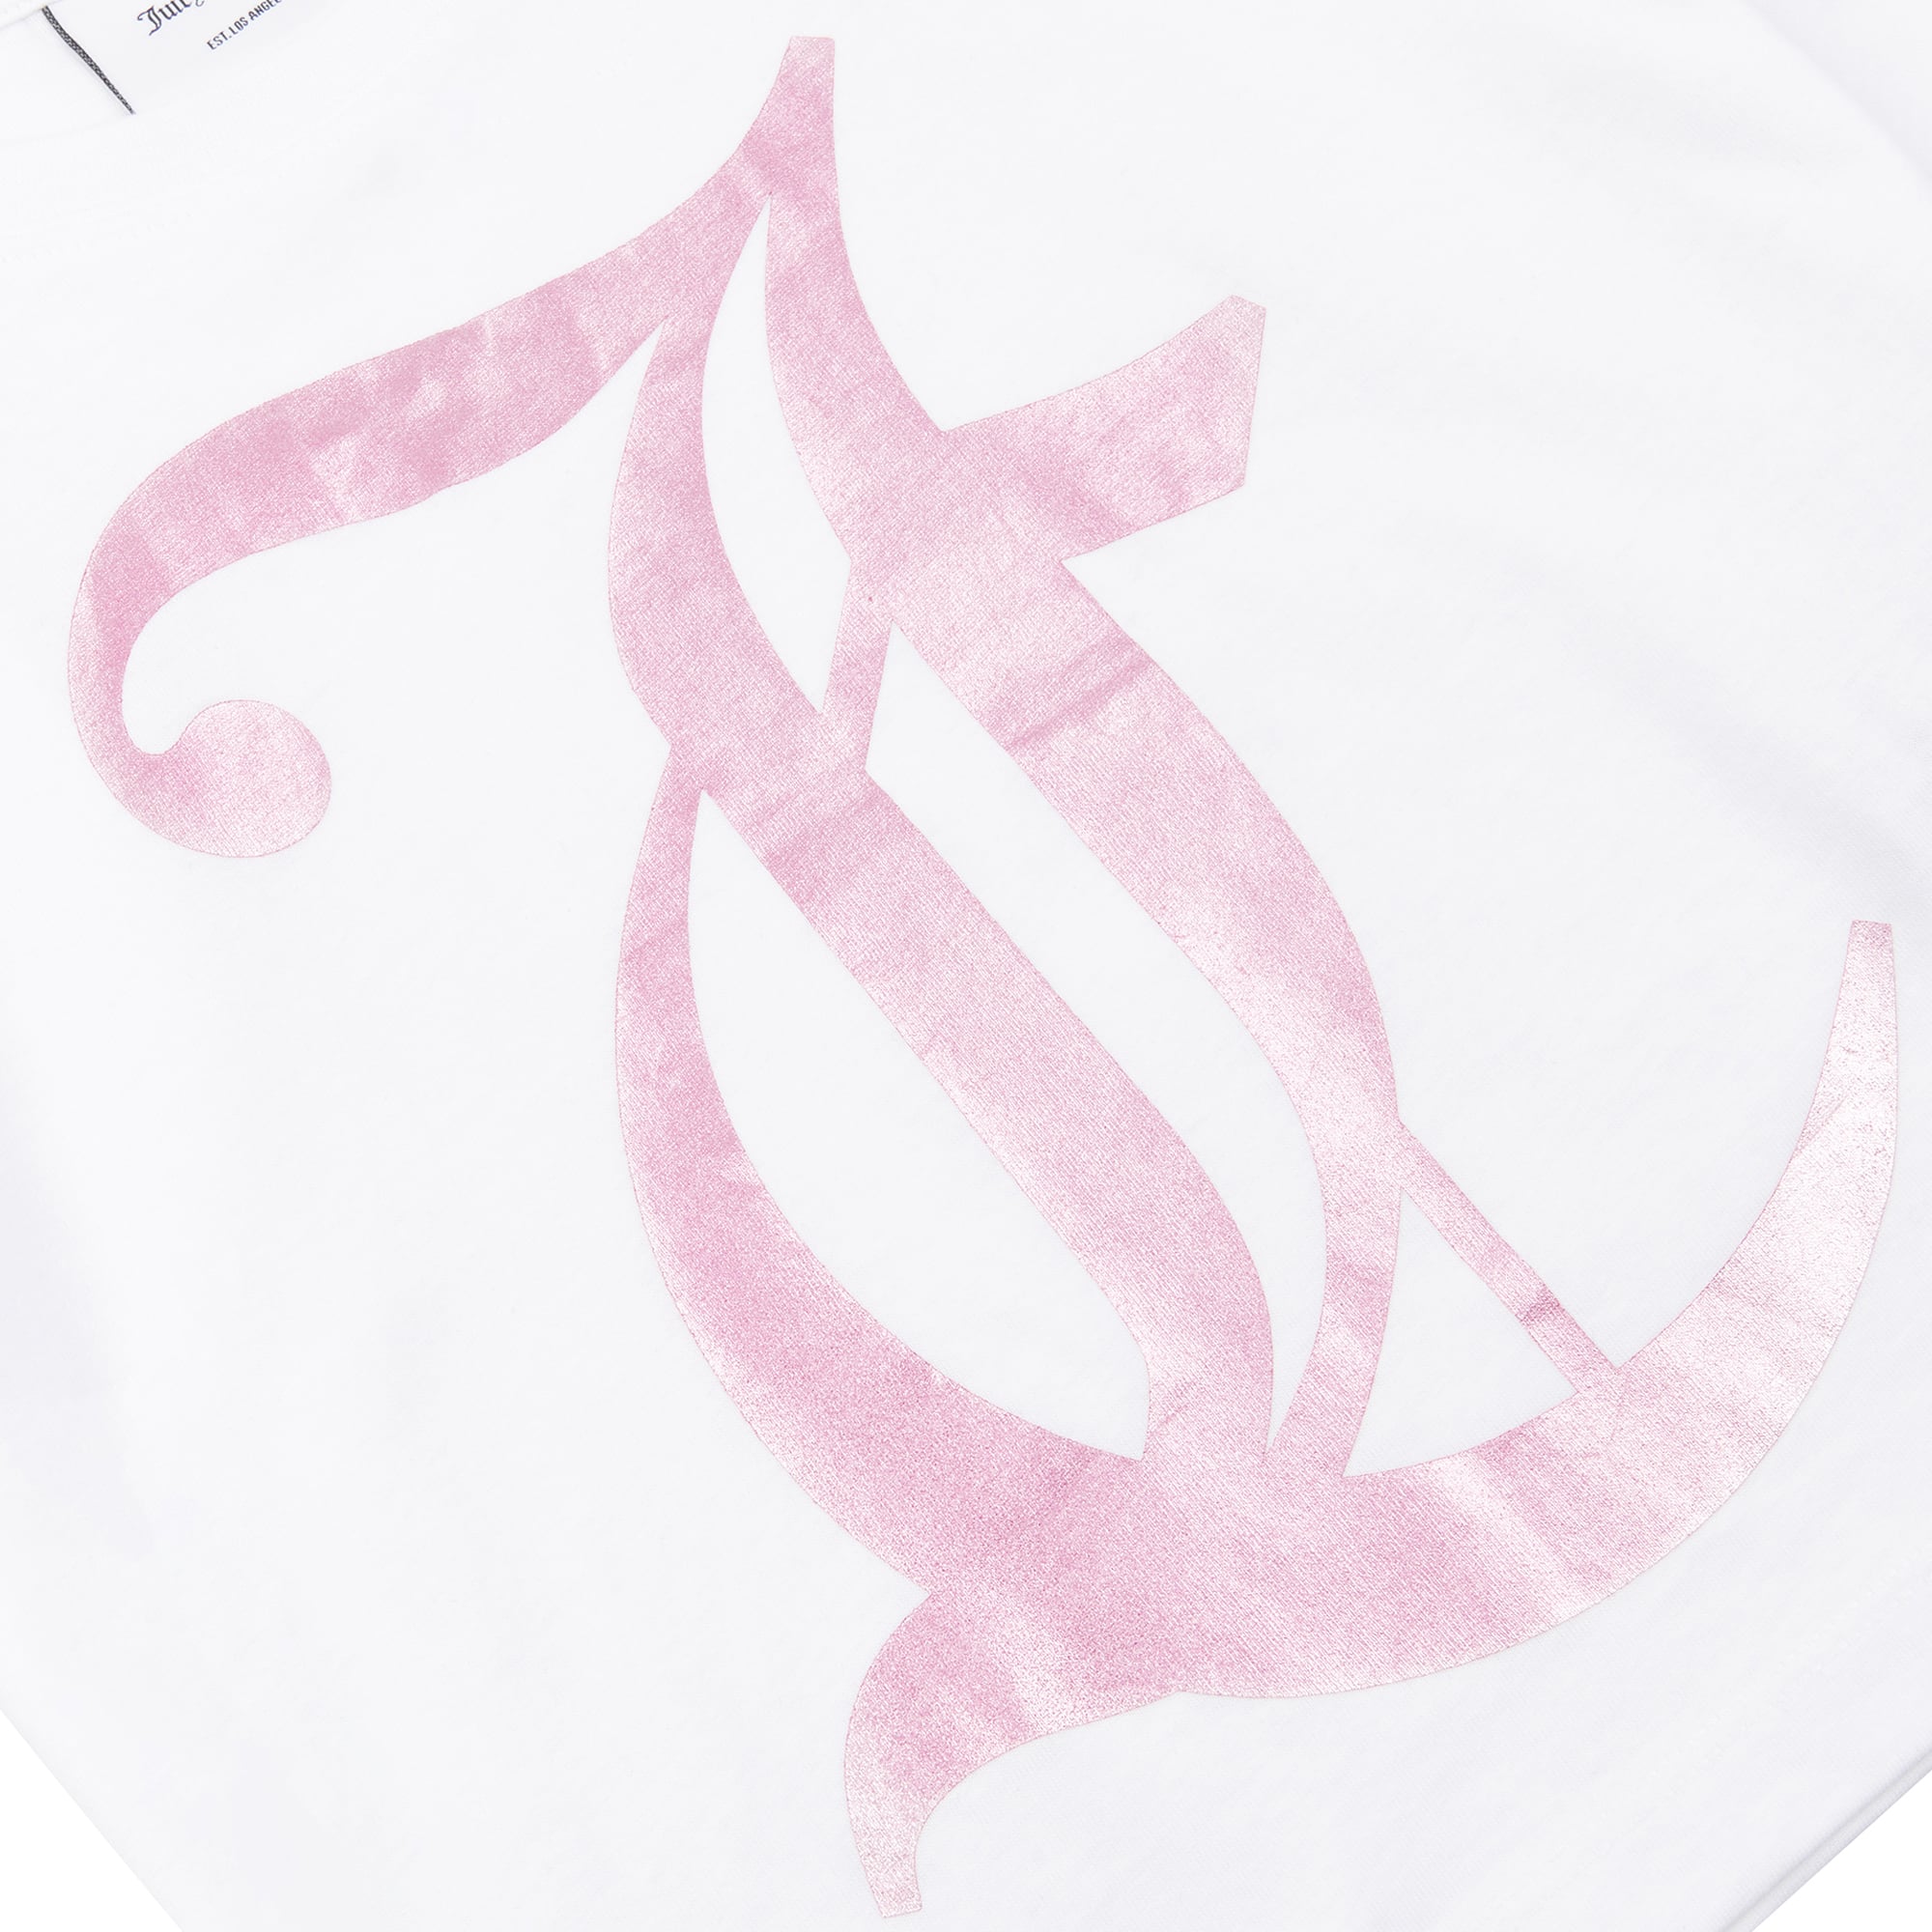 Juicy Couture pale pink logo close up on tshirt